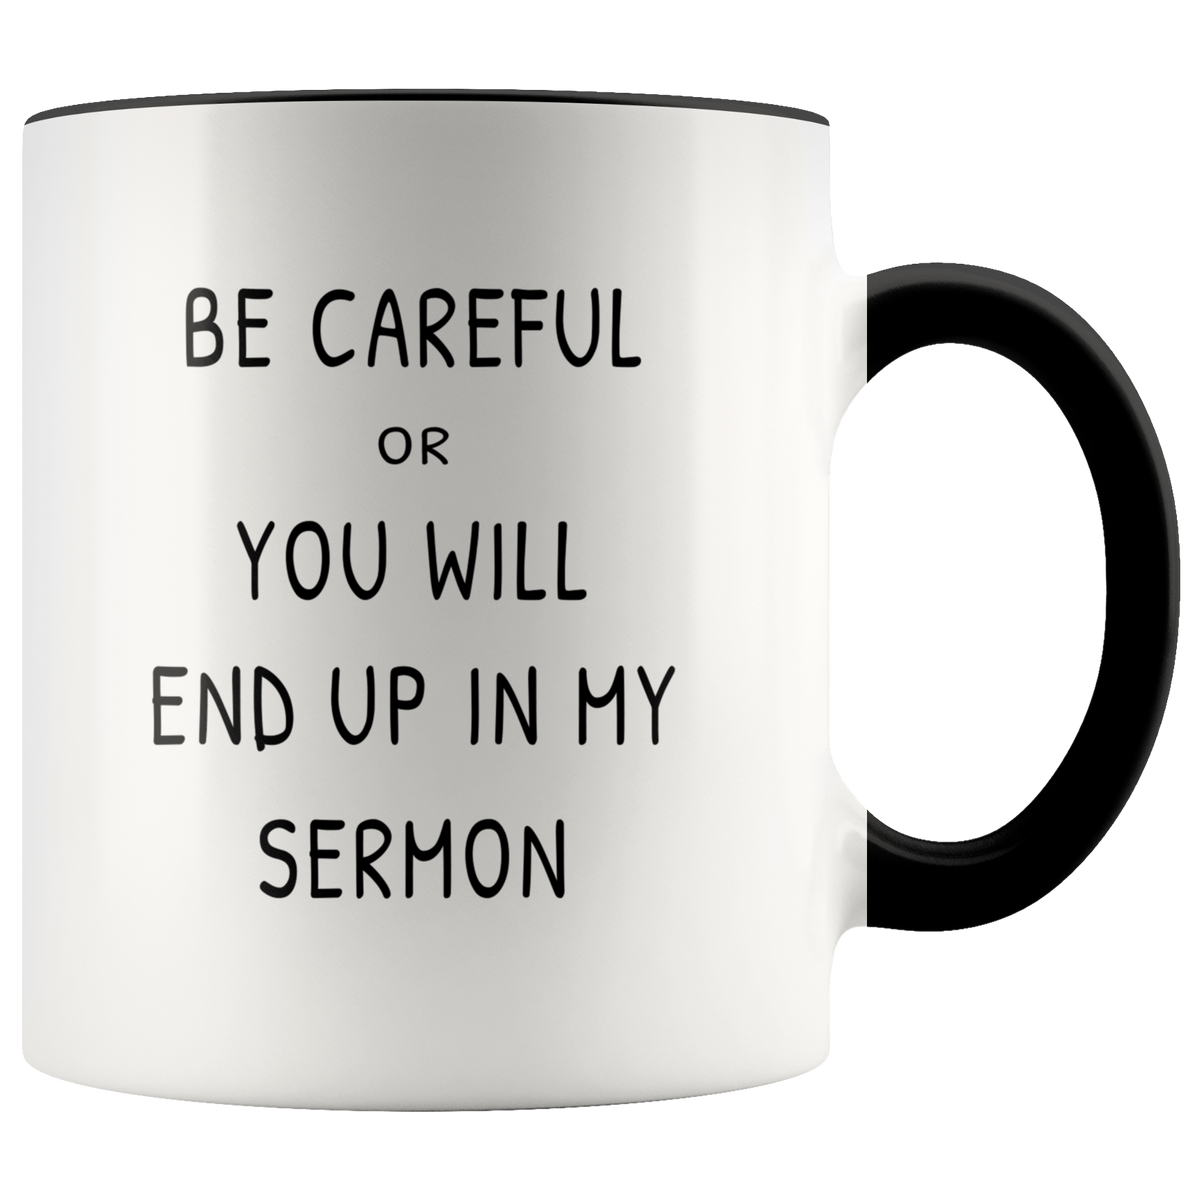 Funny Pastor Appreciation Mug Gift - Be Careful Or You Will End Up In My Sermon Accent Coffee Mug 11oz (black)